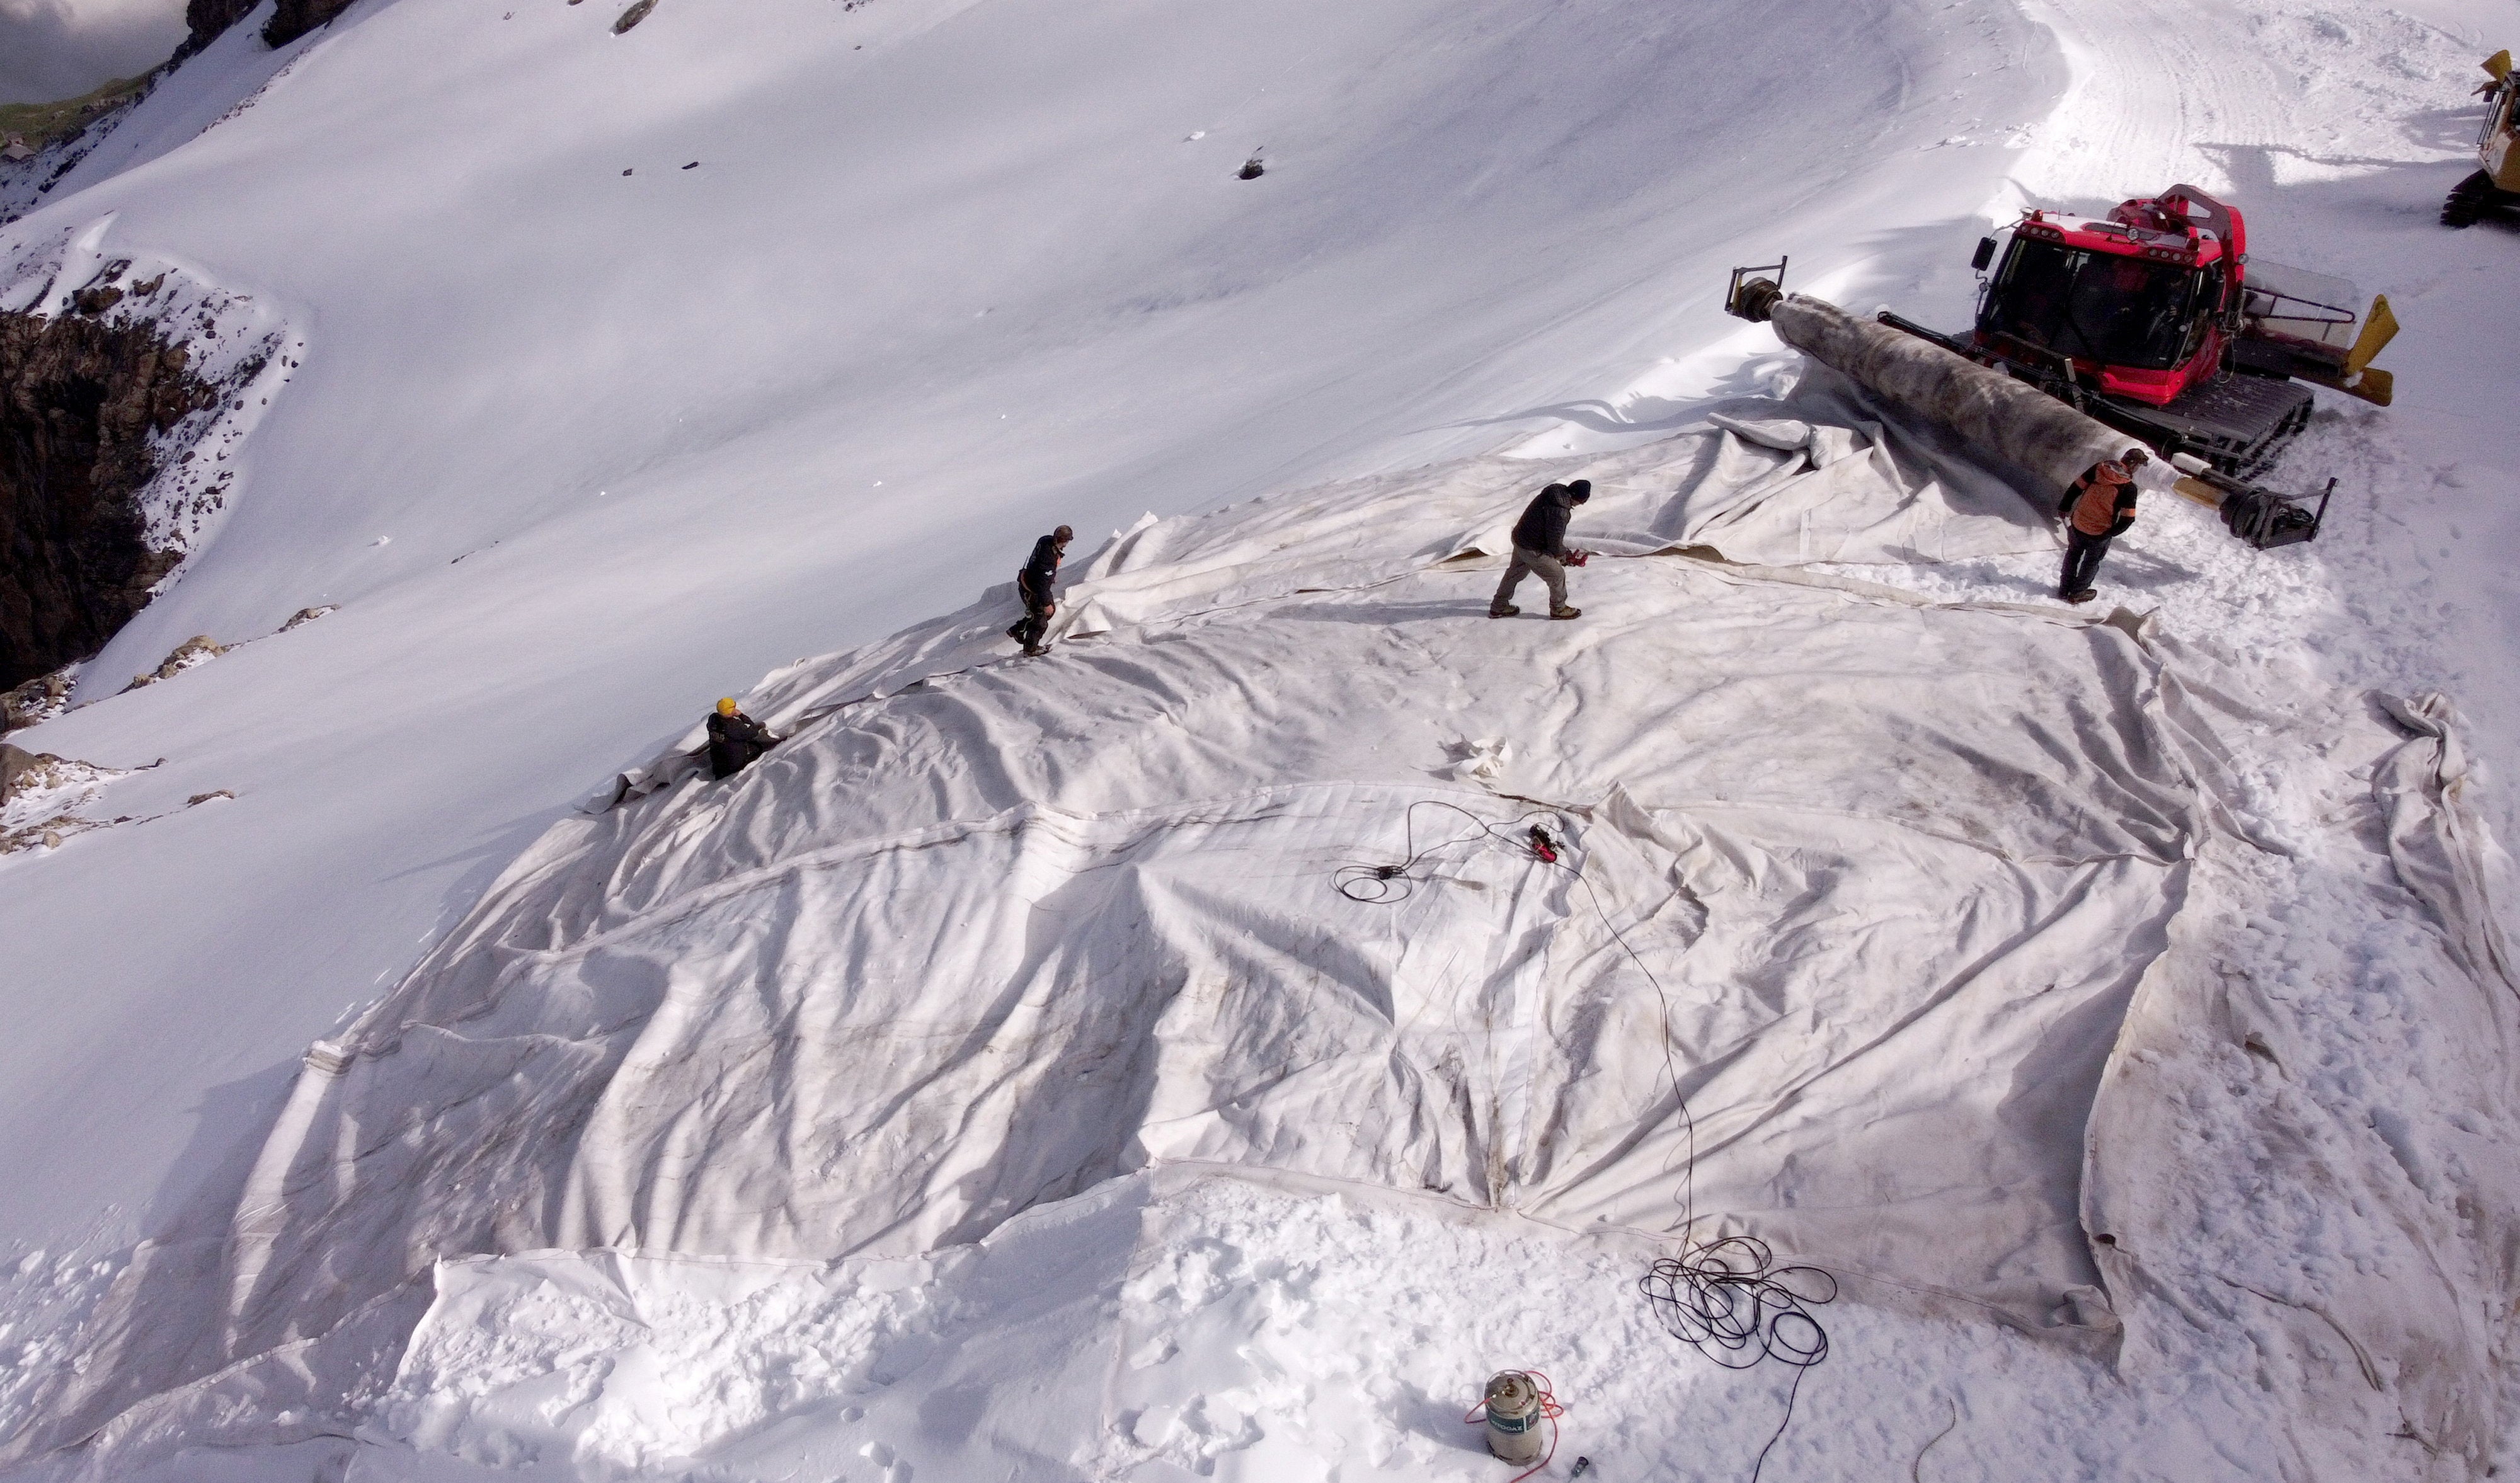 Employees place blankets on parts of the glacier to protect it against melting